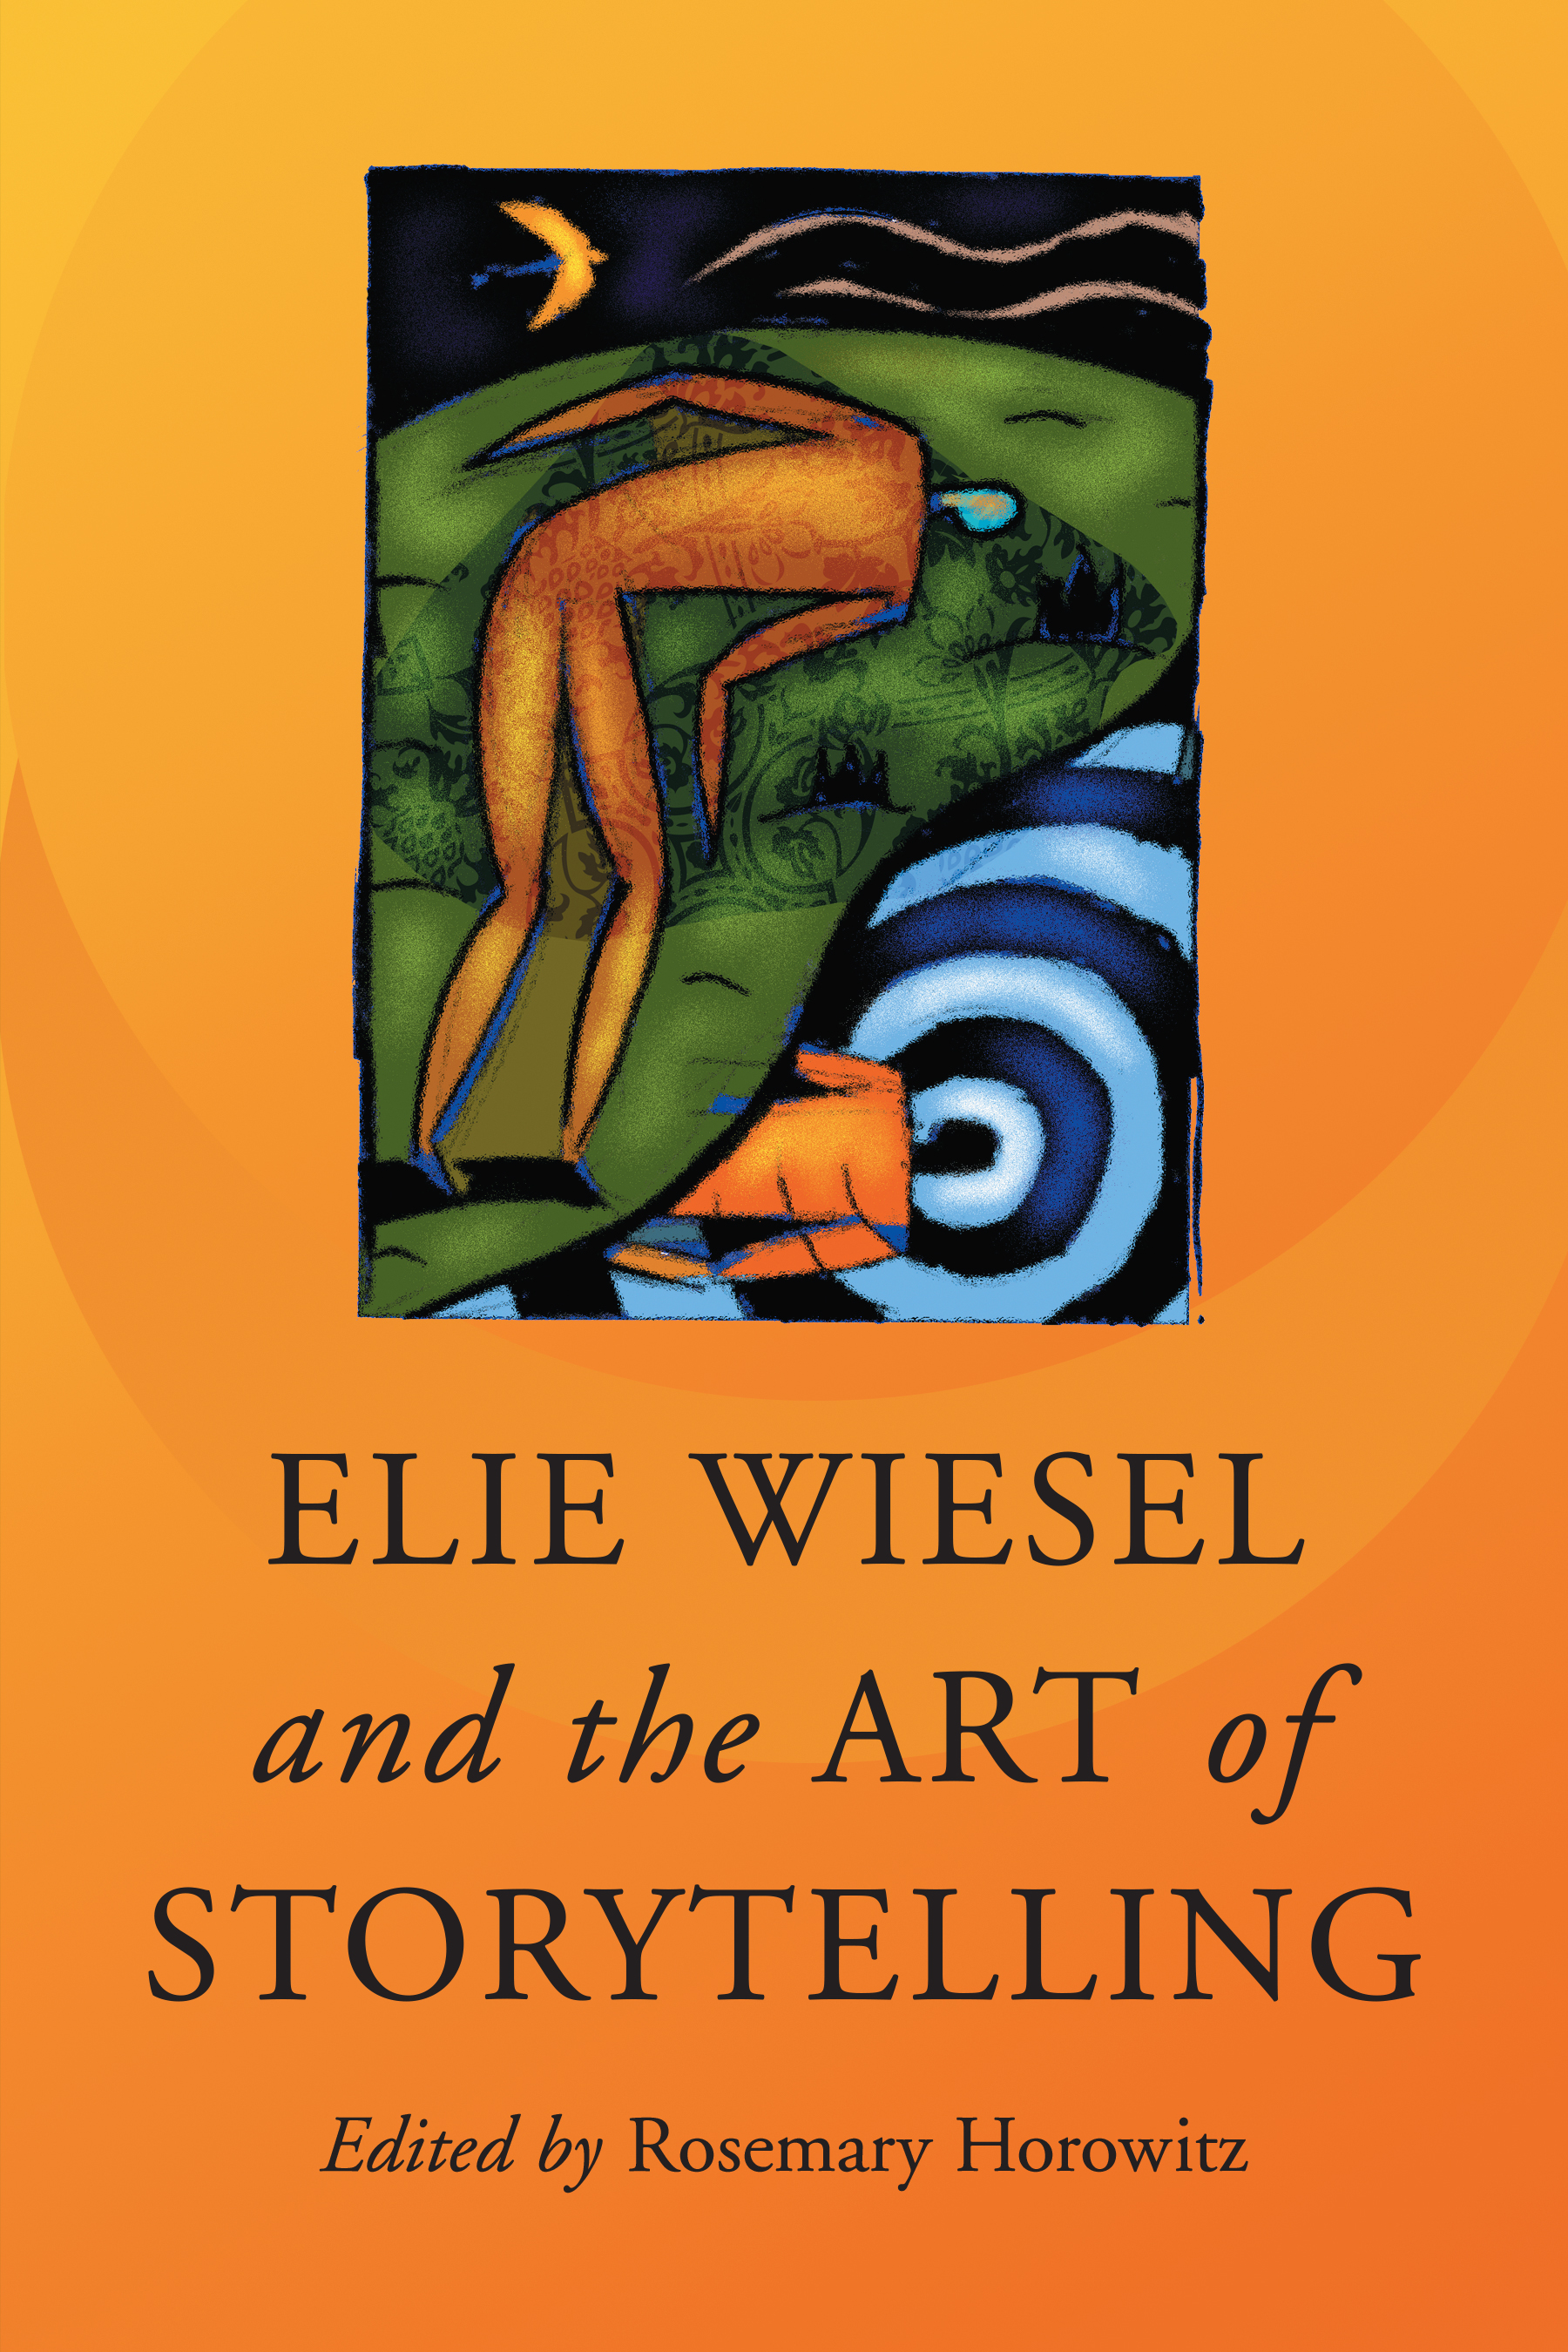 Elie Wiesel and the Art of Storytelling - image 1